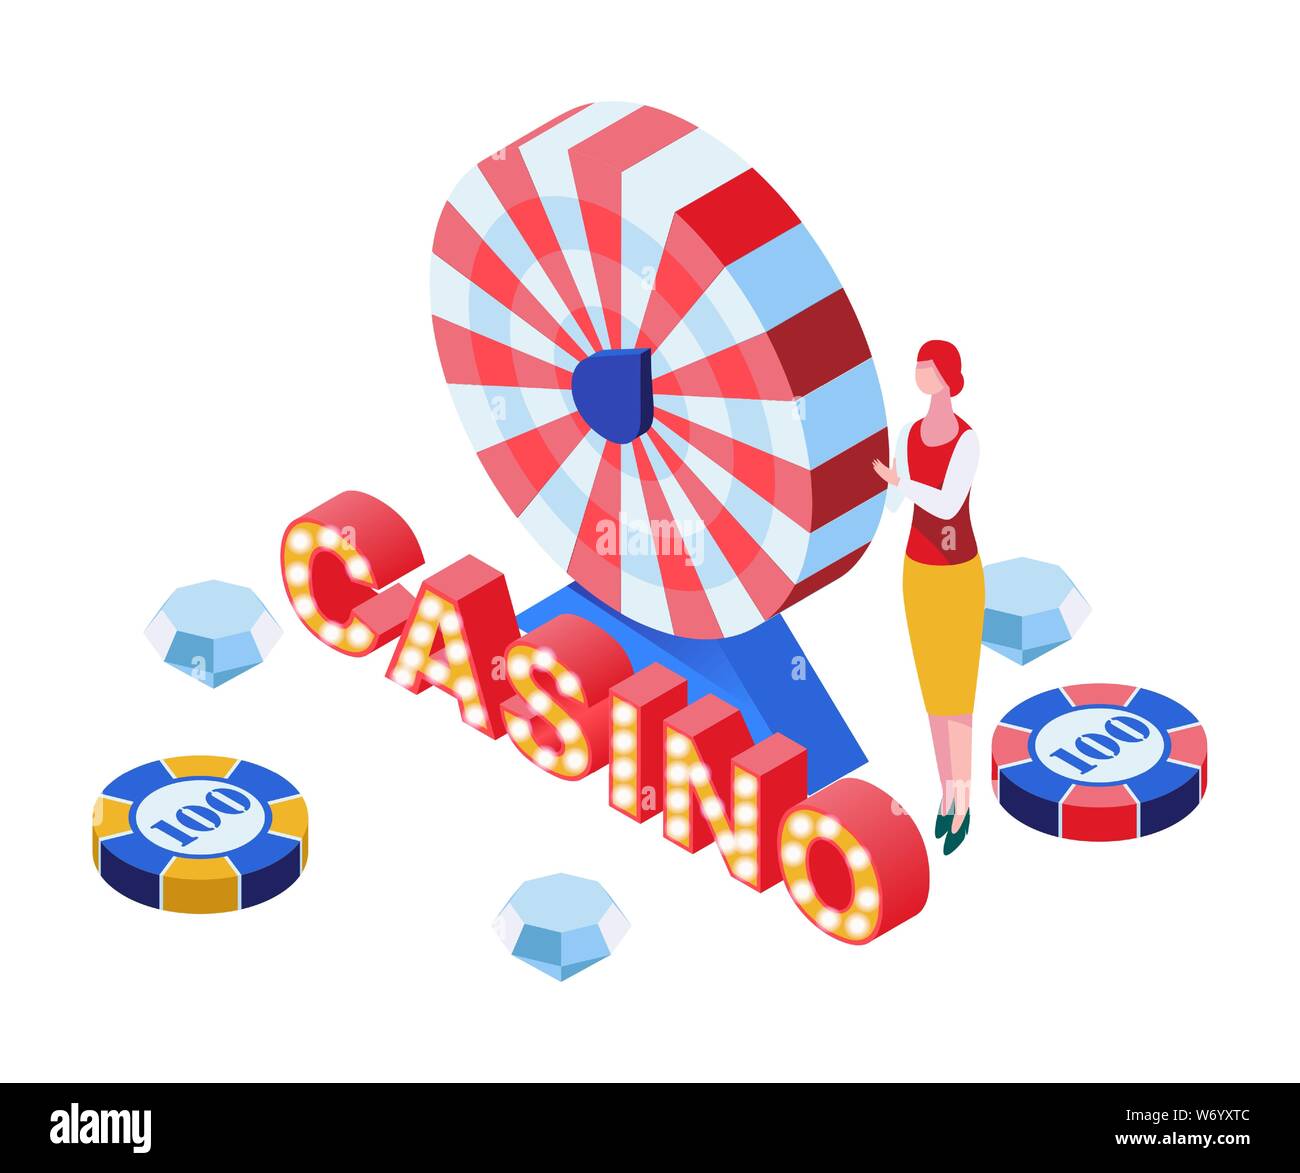 Casino game croupier isometric illustration. Gambling business, casino luxury roulette striped wheel 3D isolated clipart. Modern entertainment, poker chips and diamonds prizes drawing Stock Vector